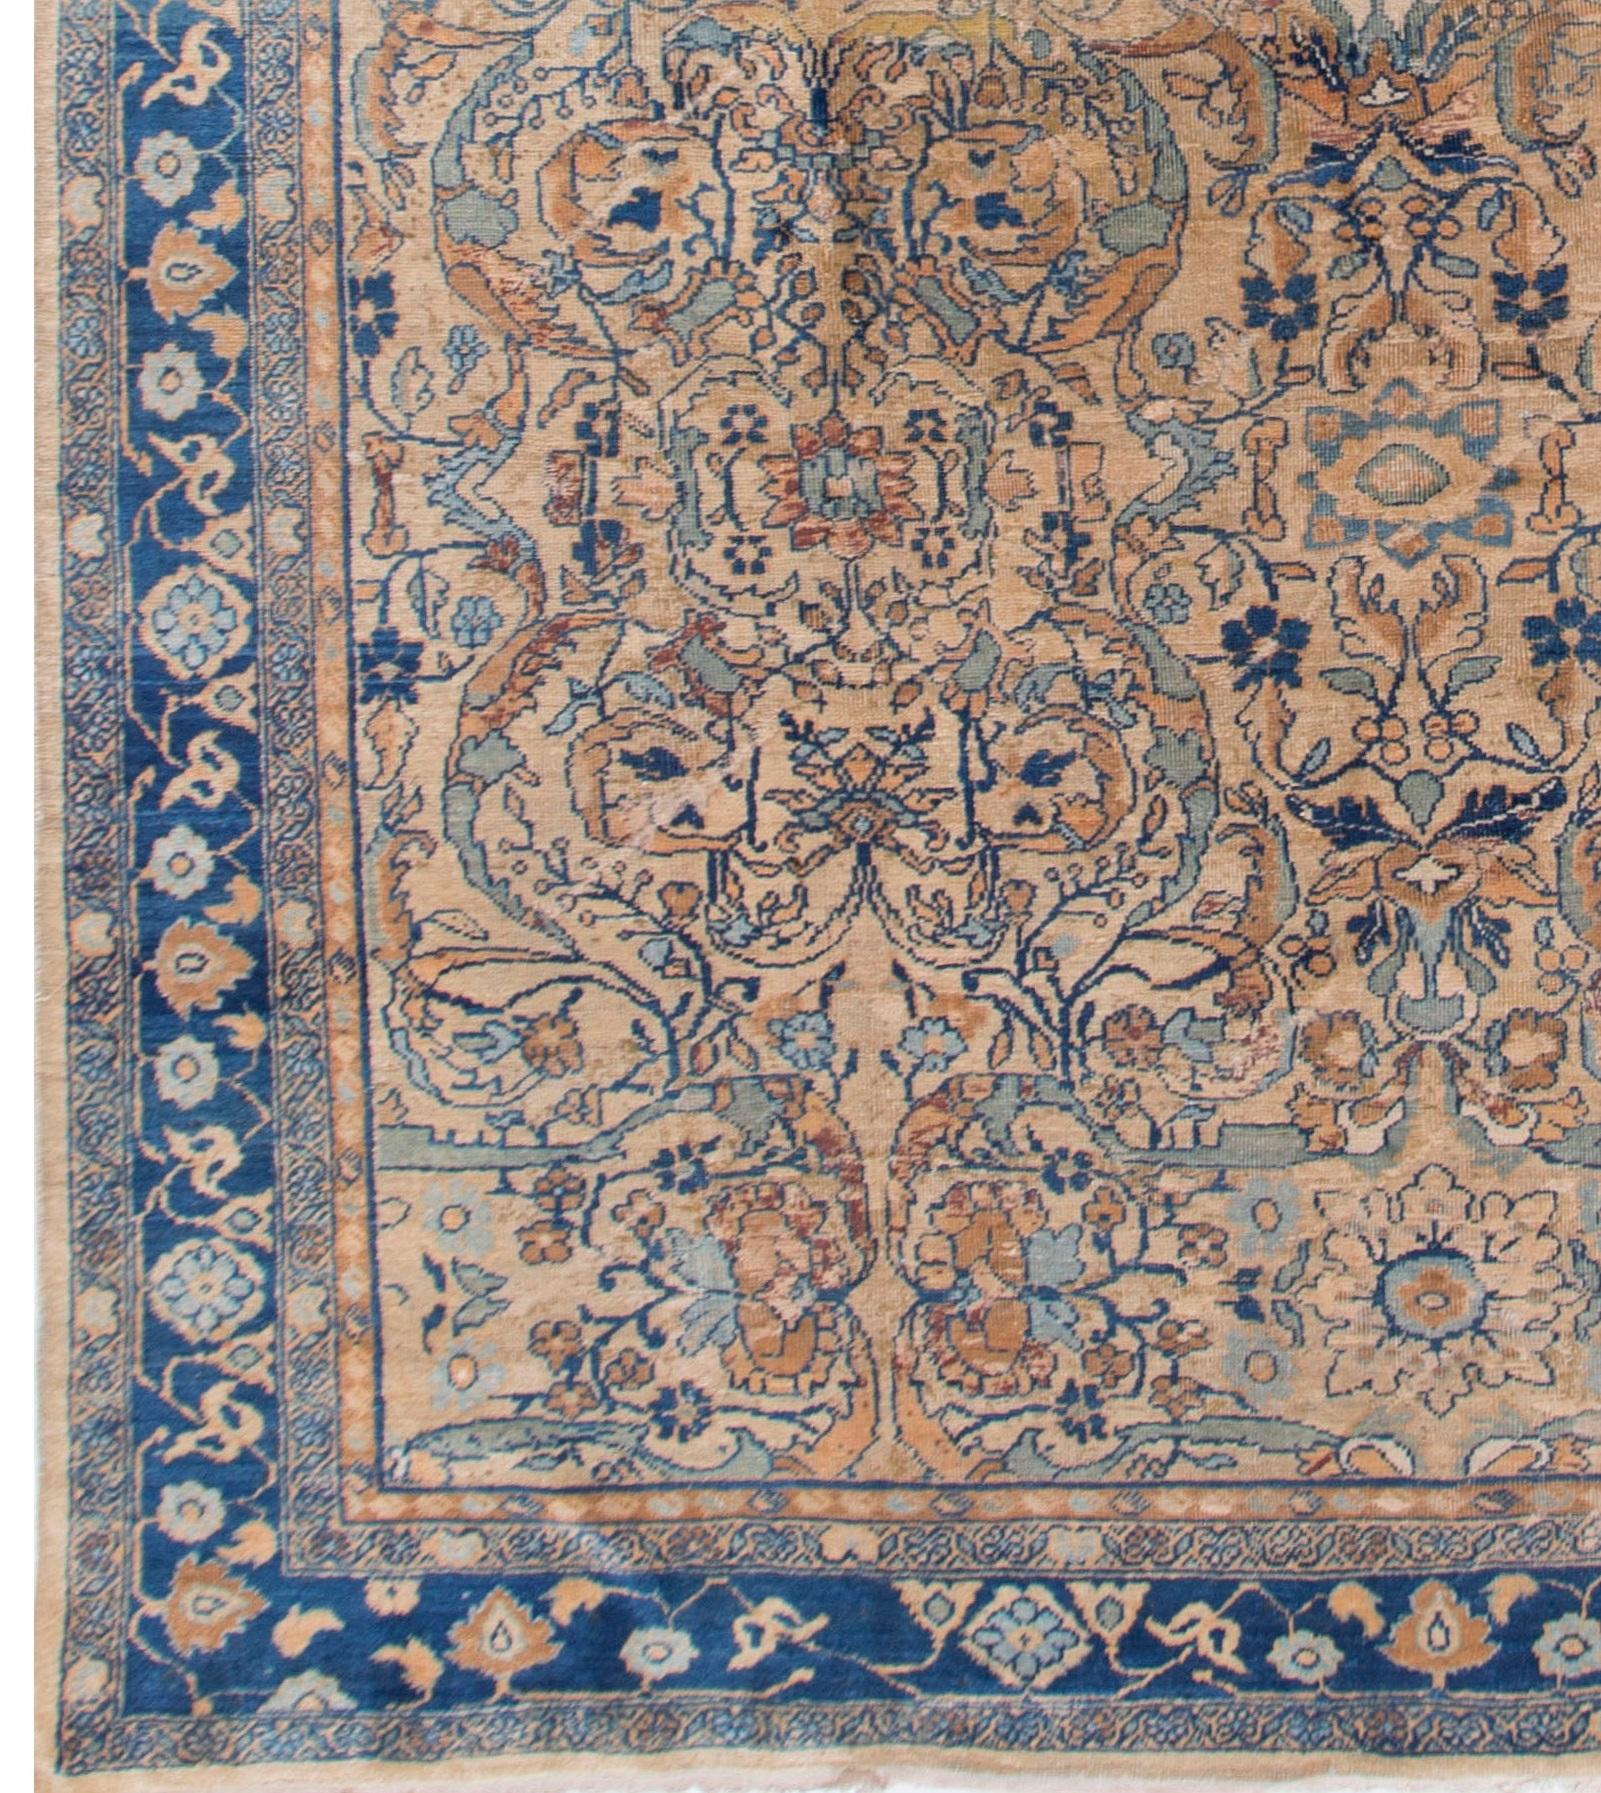 Antique Persian Feraghan rug, circa 1890. Fereghan in west Persia came to prominence in the 18th century under the rule of Shah Nadir who exerted an influence on its weaving and production. The carpets from this area were prized even at this time.